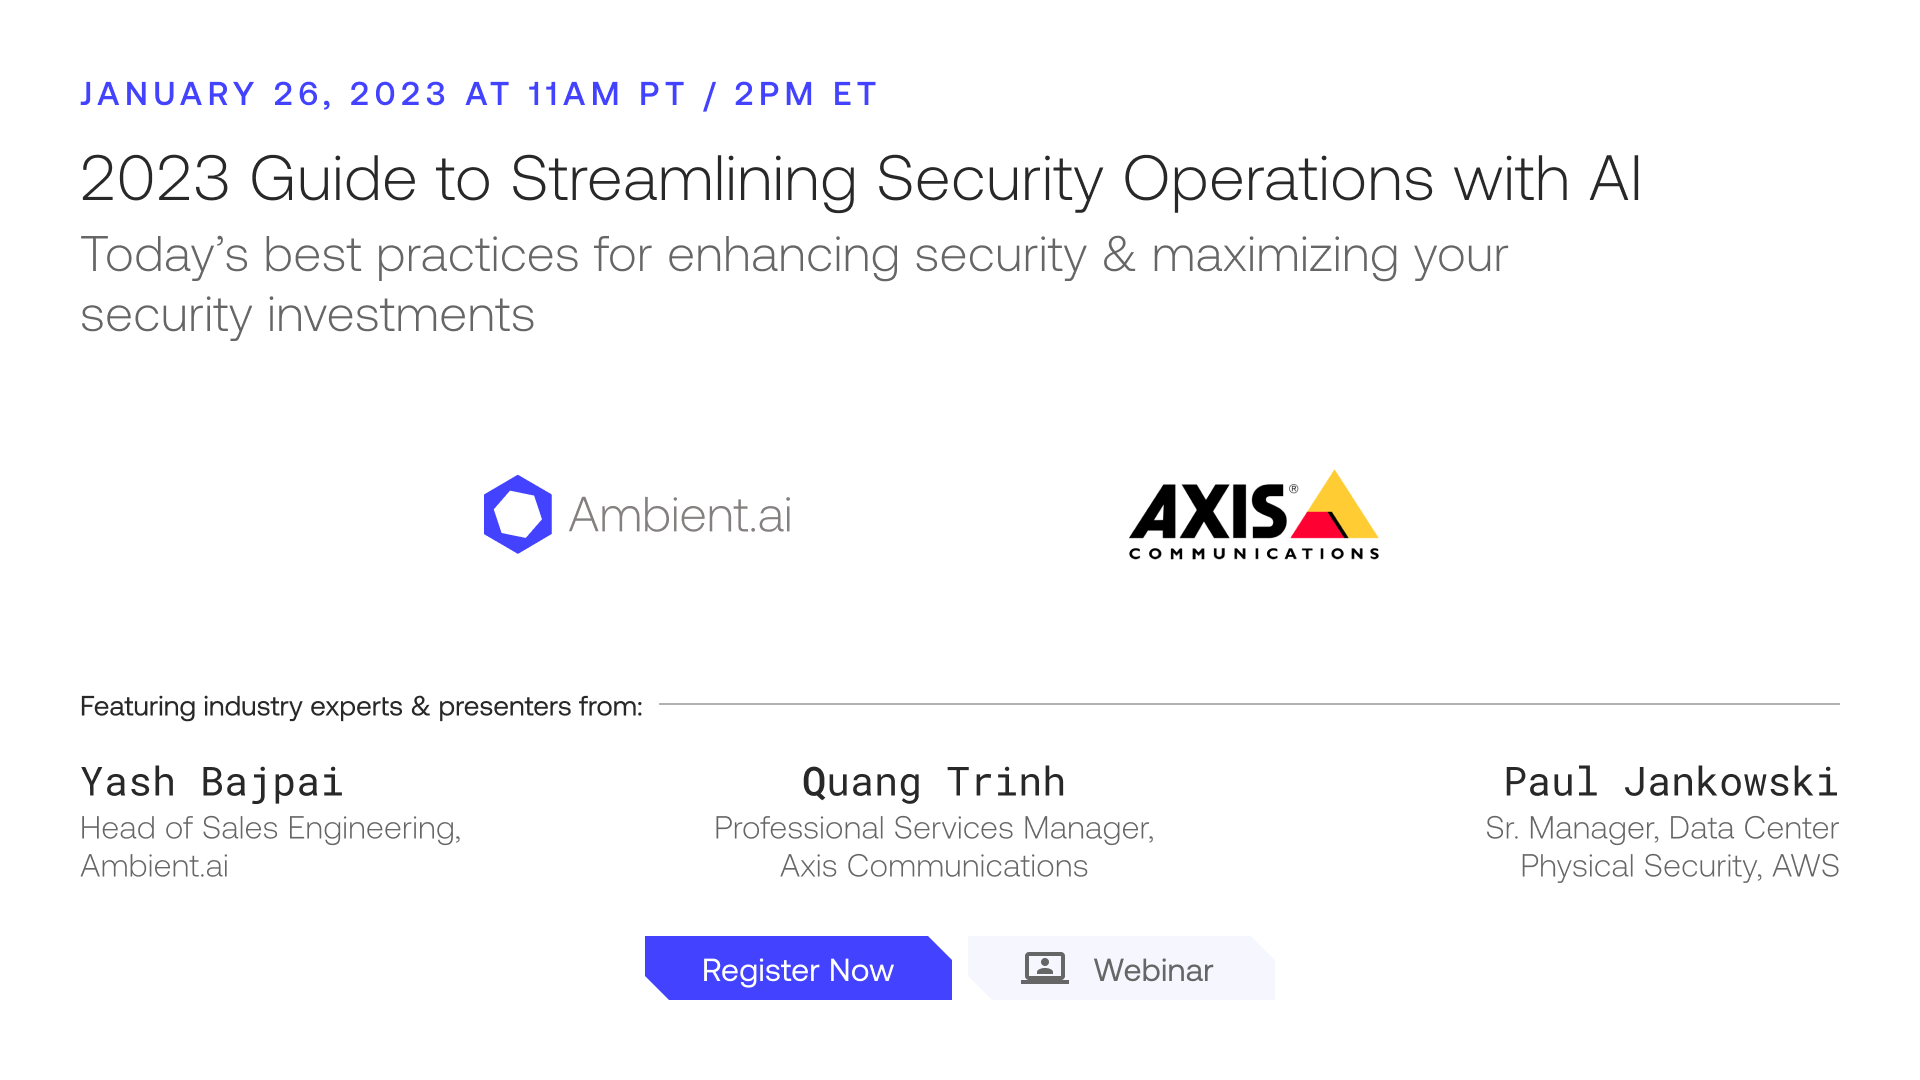 The 2023 Guide to Streamlining Security Operations with AI